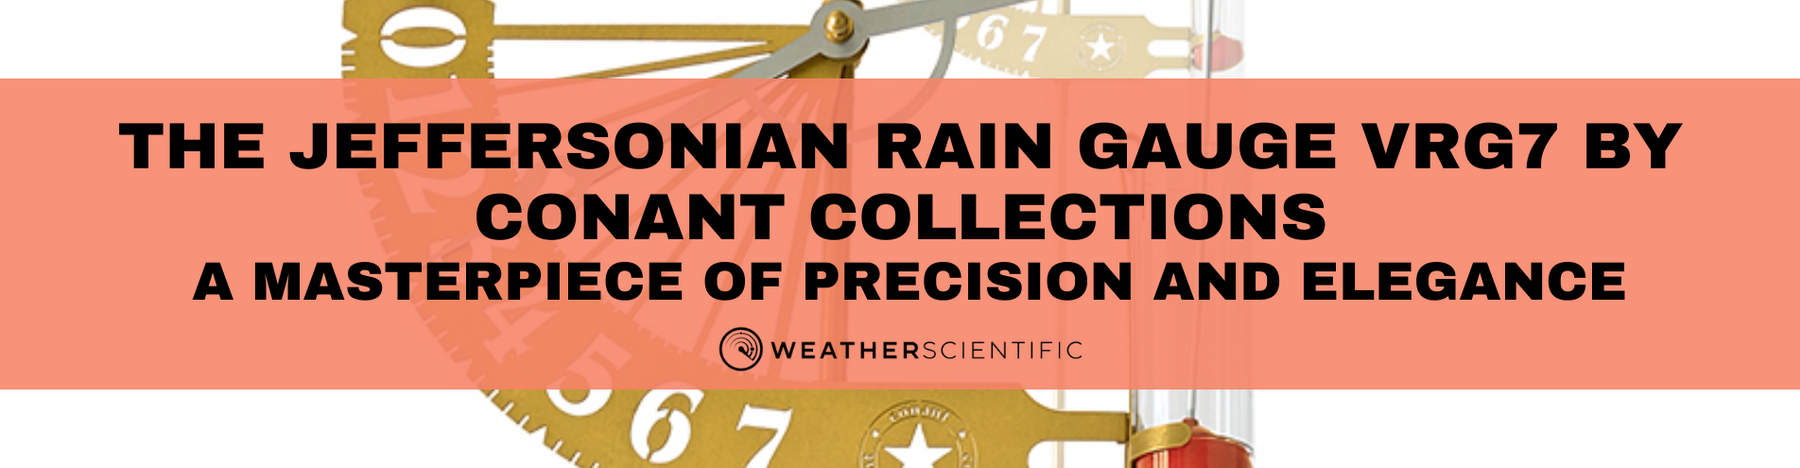 The Jeffersonian Rain Gauge VRG7 by Conant Collections: A Masterpiece of Precision and Elegance